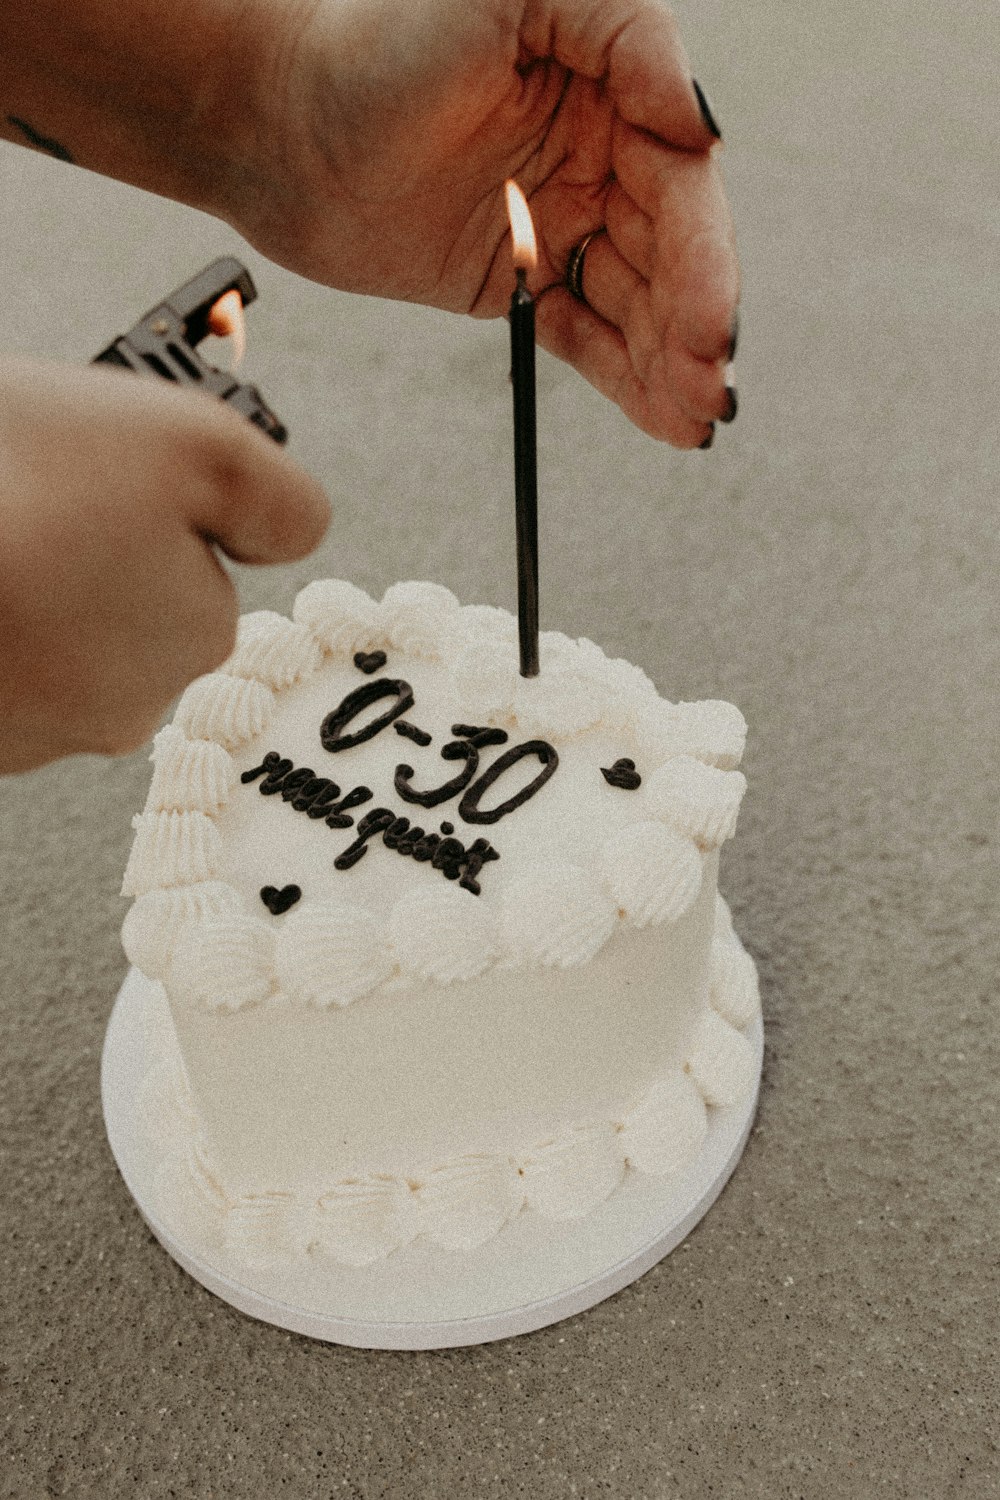 a person lighting a candle on top of a cake